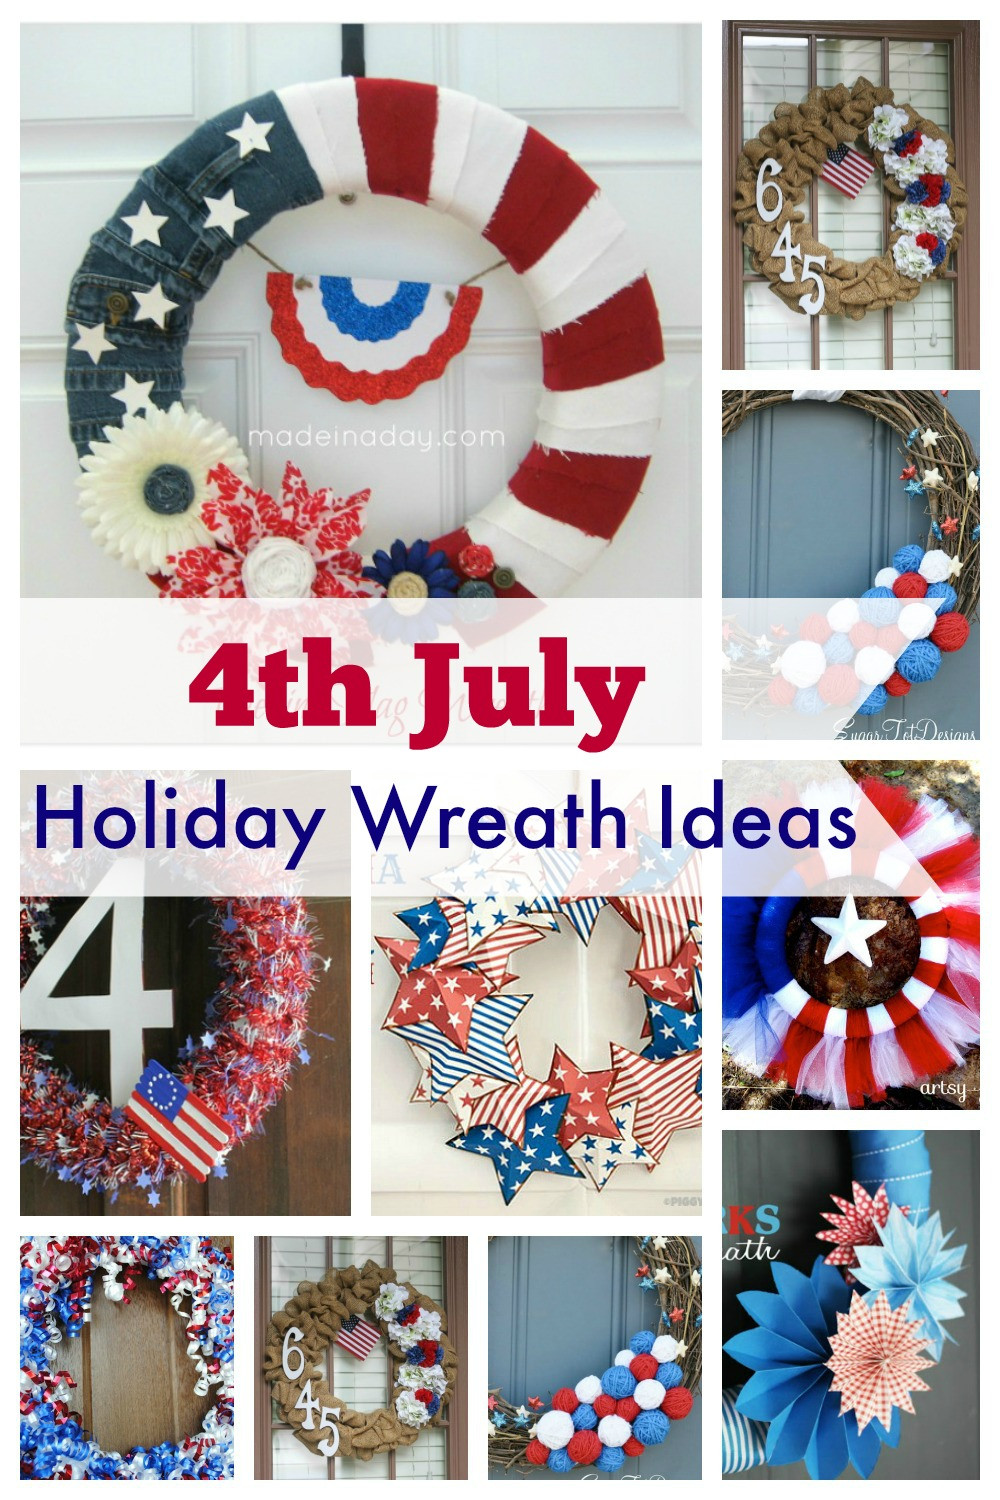 4th Of July Vacation Ideas
 4th July Holiday Wreath Ideas